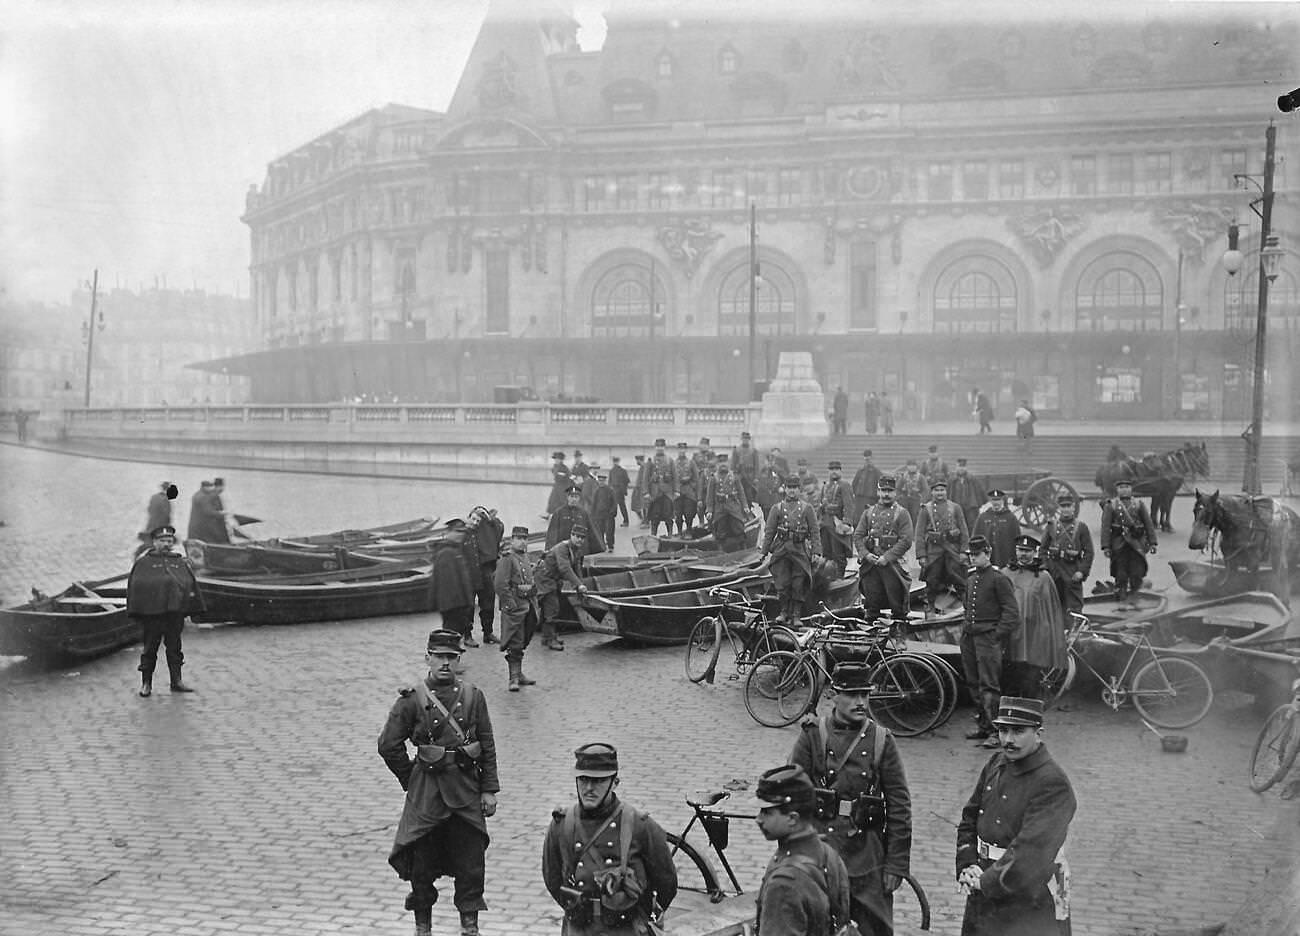 Historic flooding of Paris, 1910 - Army engineers with boats in front of Gare de Lyon.